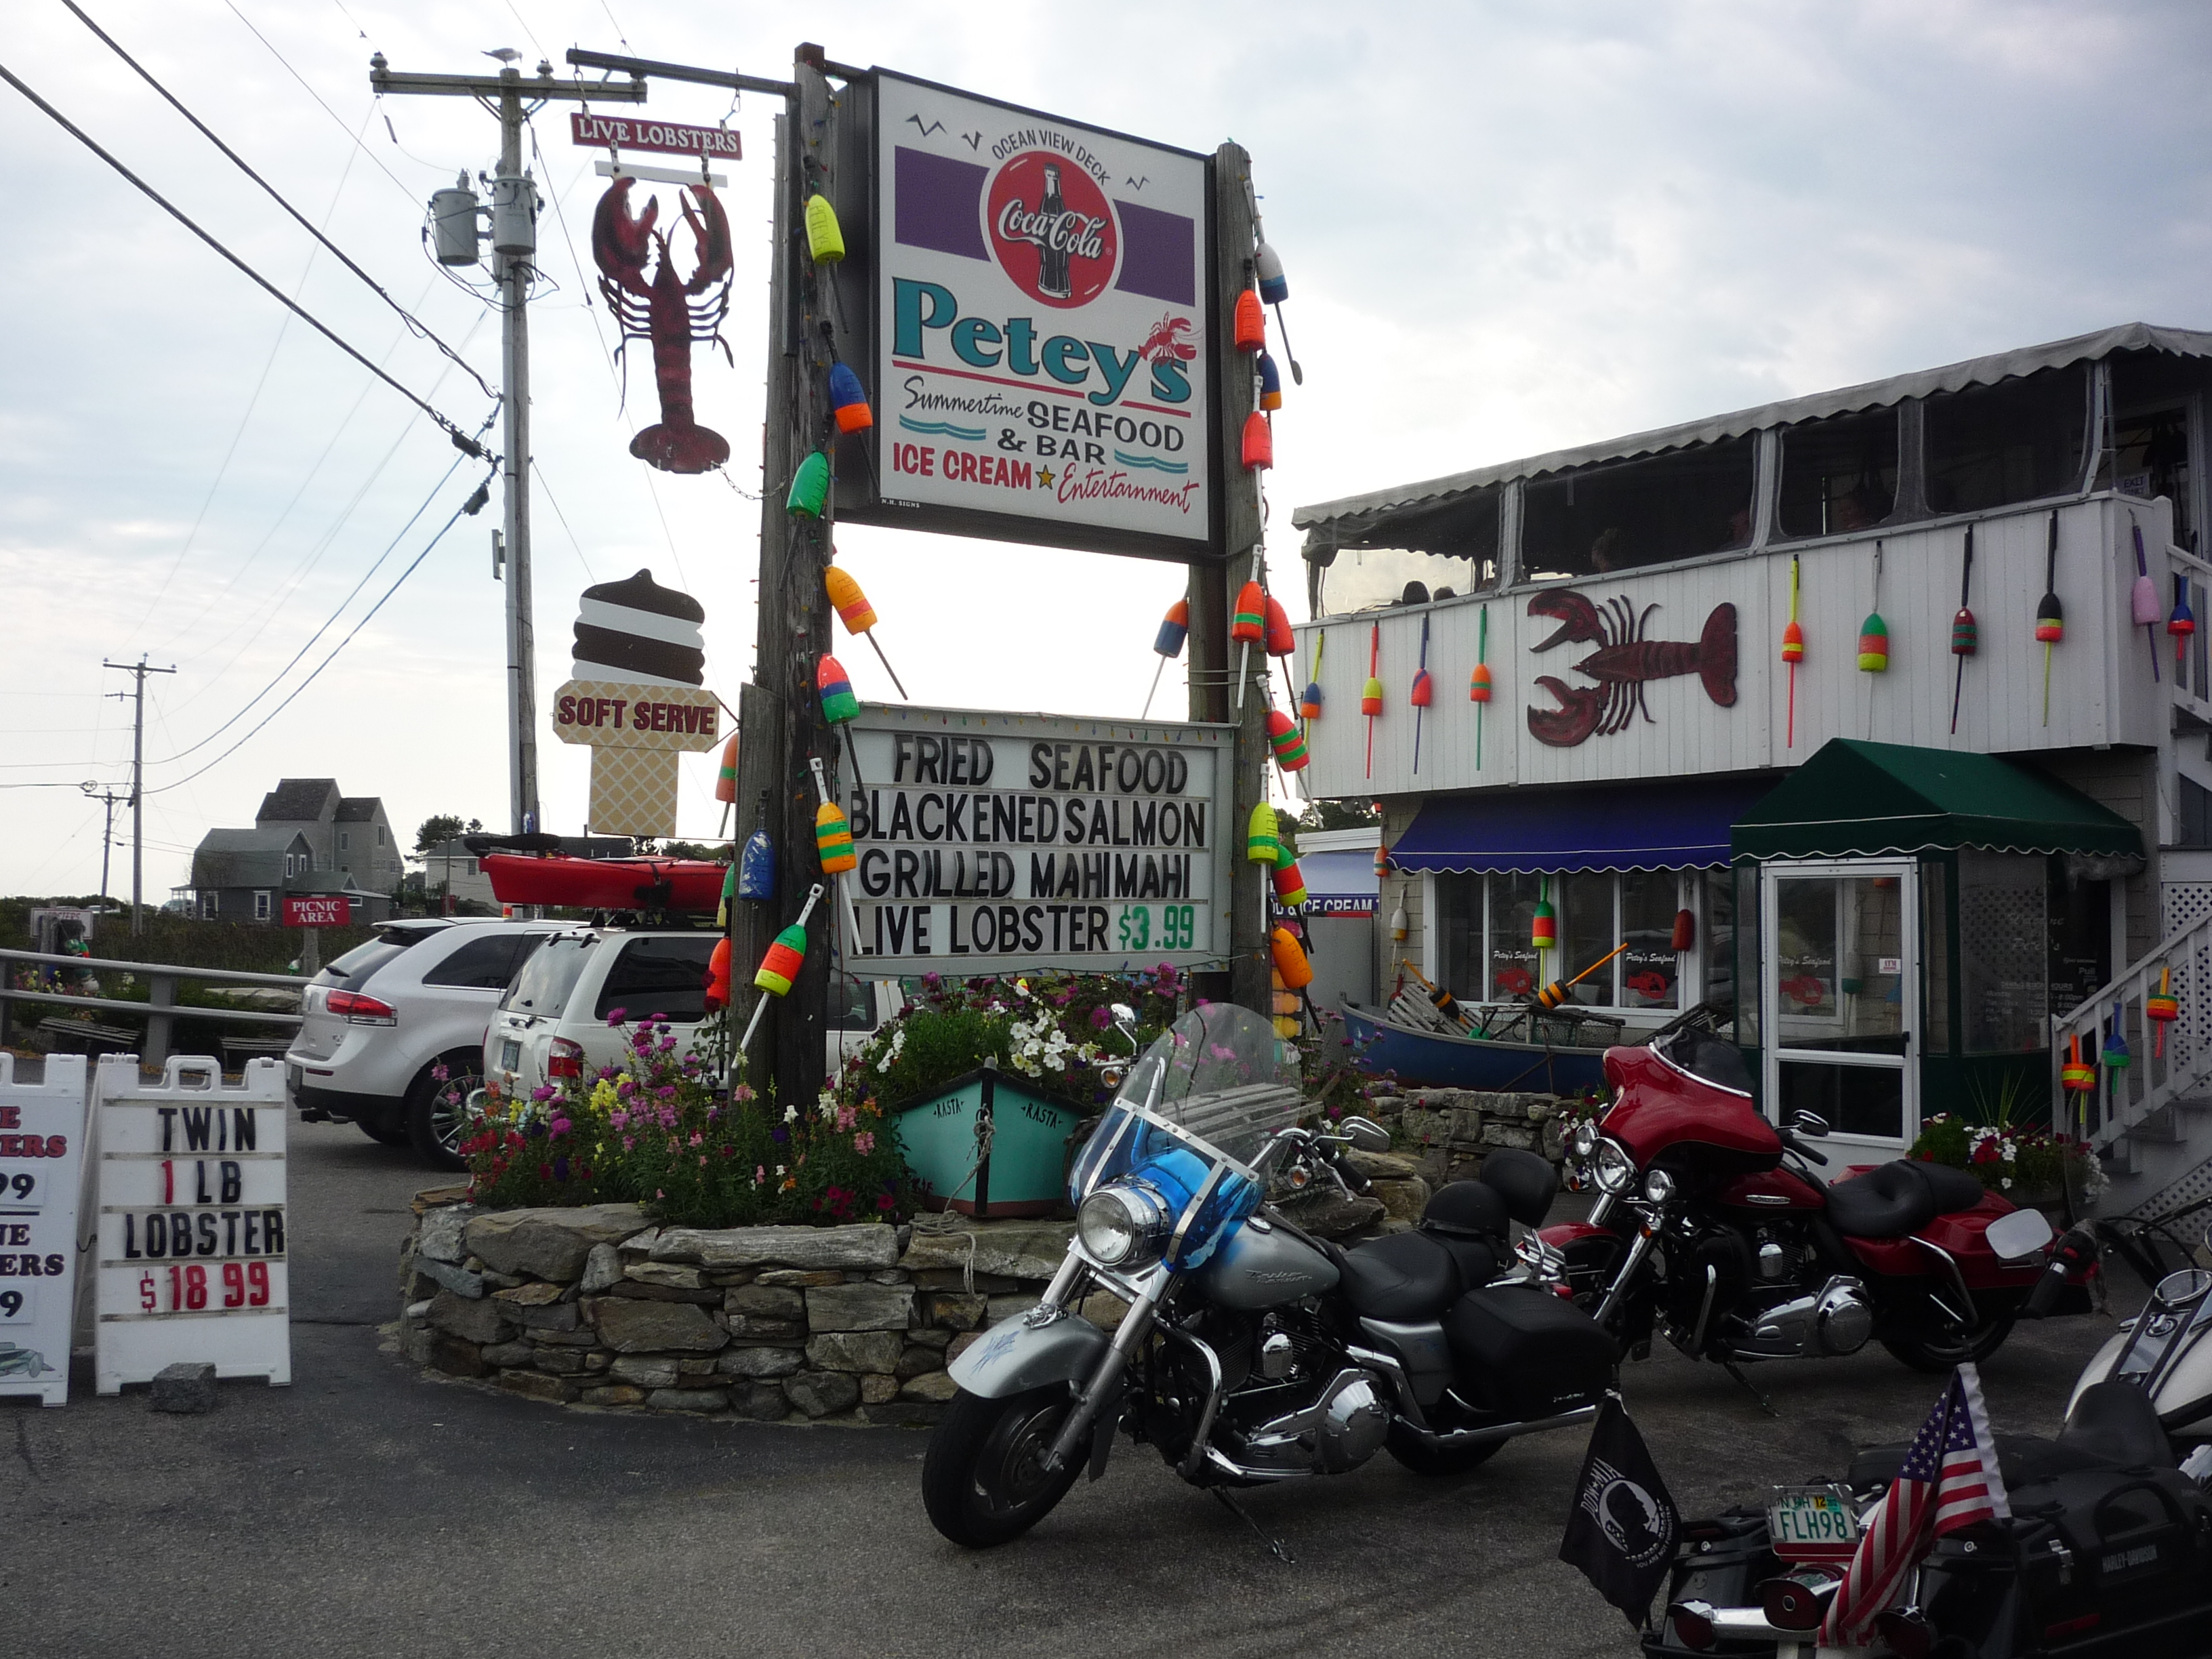 Photo of Petey's Summertime Seafood and Bar